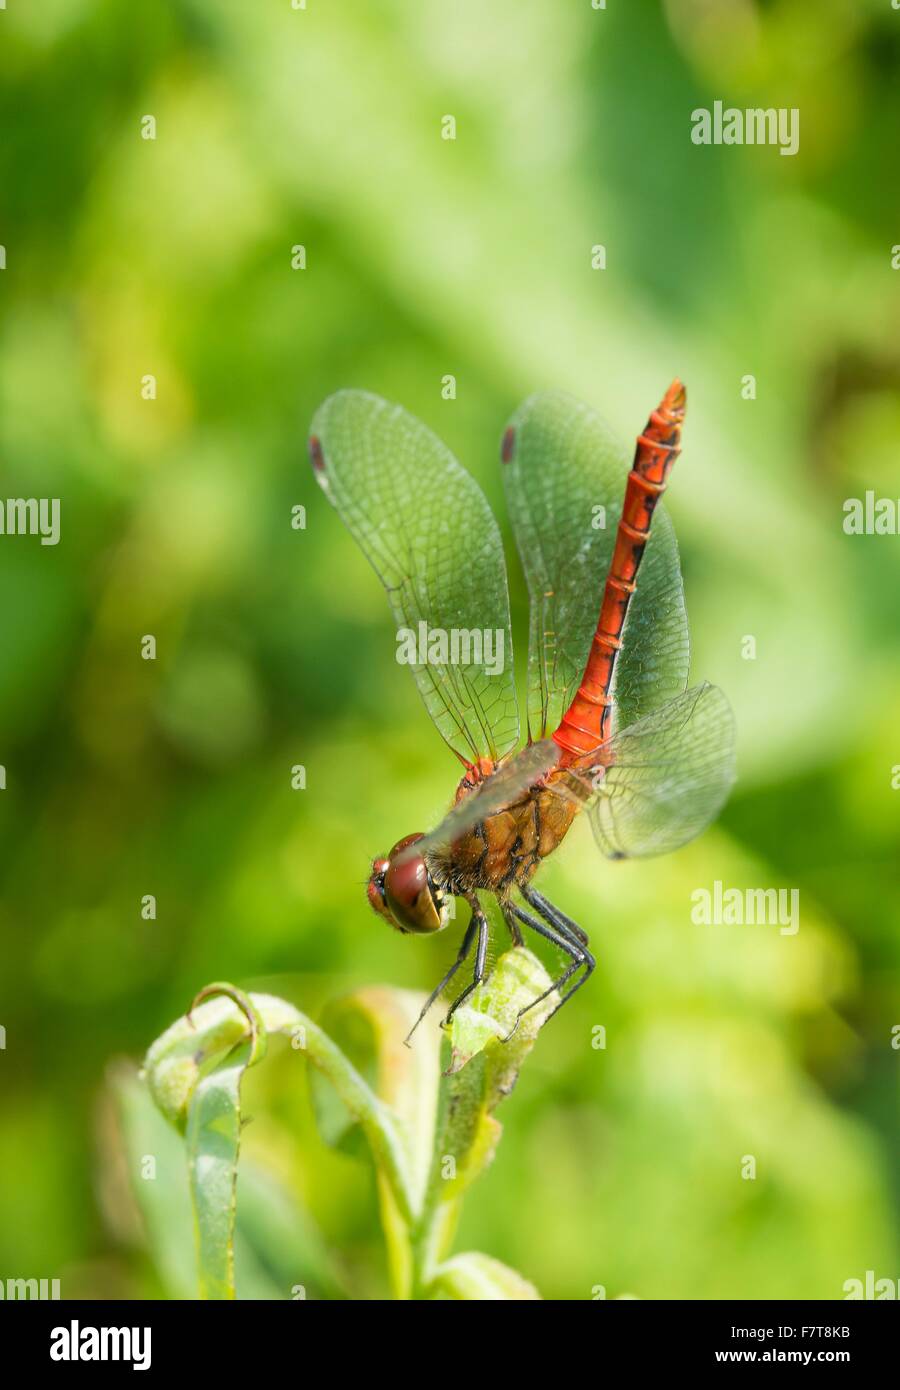 Ruddy darter (Sympetrum sanguineum), sexually mature male, obelisk posture, on a willow leaf (Salix), medial view, Germany Stock Photo